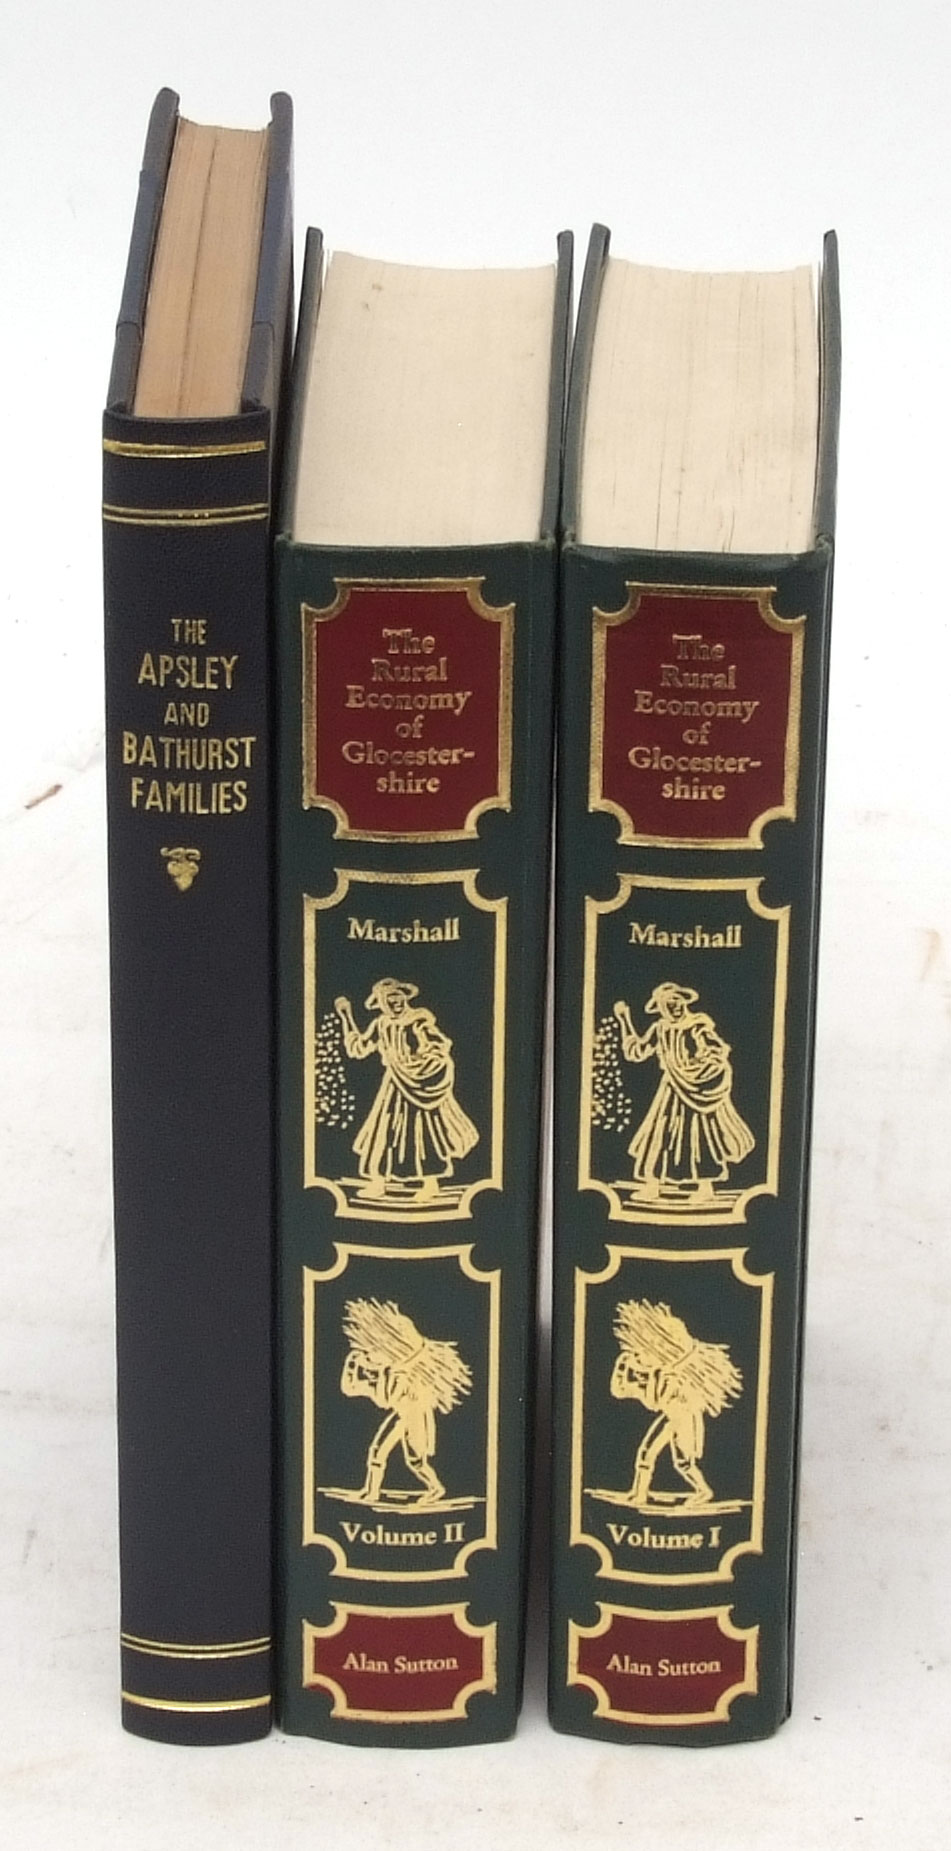 A B BATHURST: HISTORY OF THE APSLEY AND BATHURST FAMILIES, Cirencester, 1903, 2 folding pedigrees as